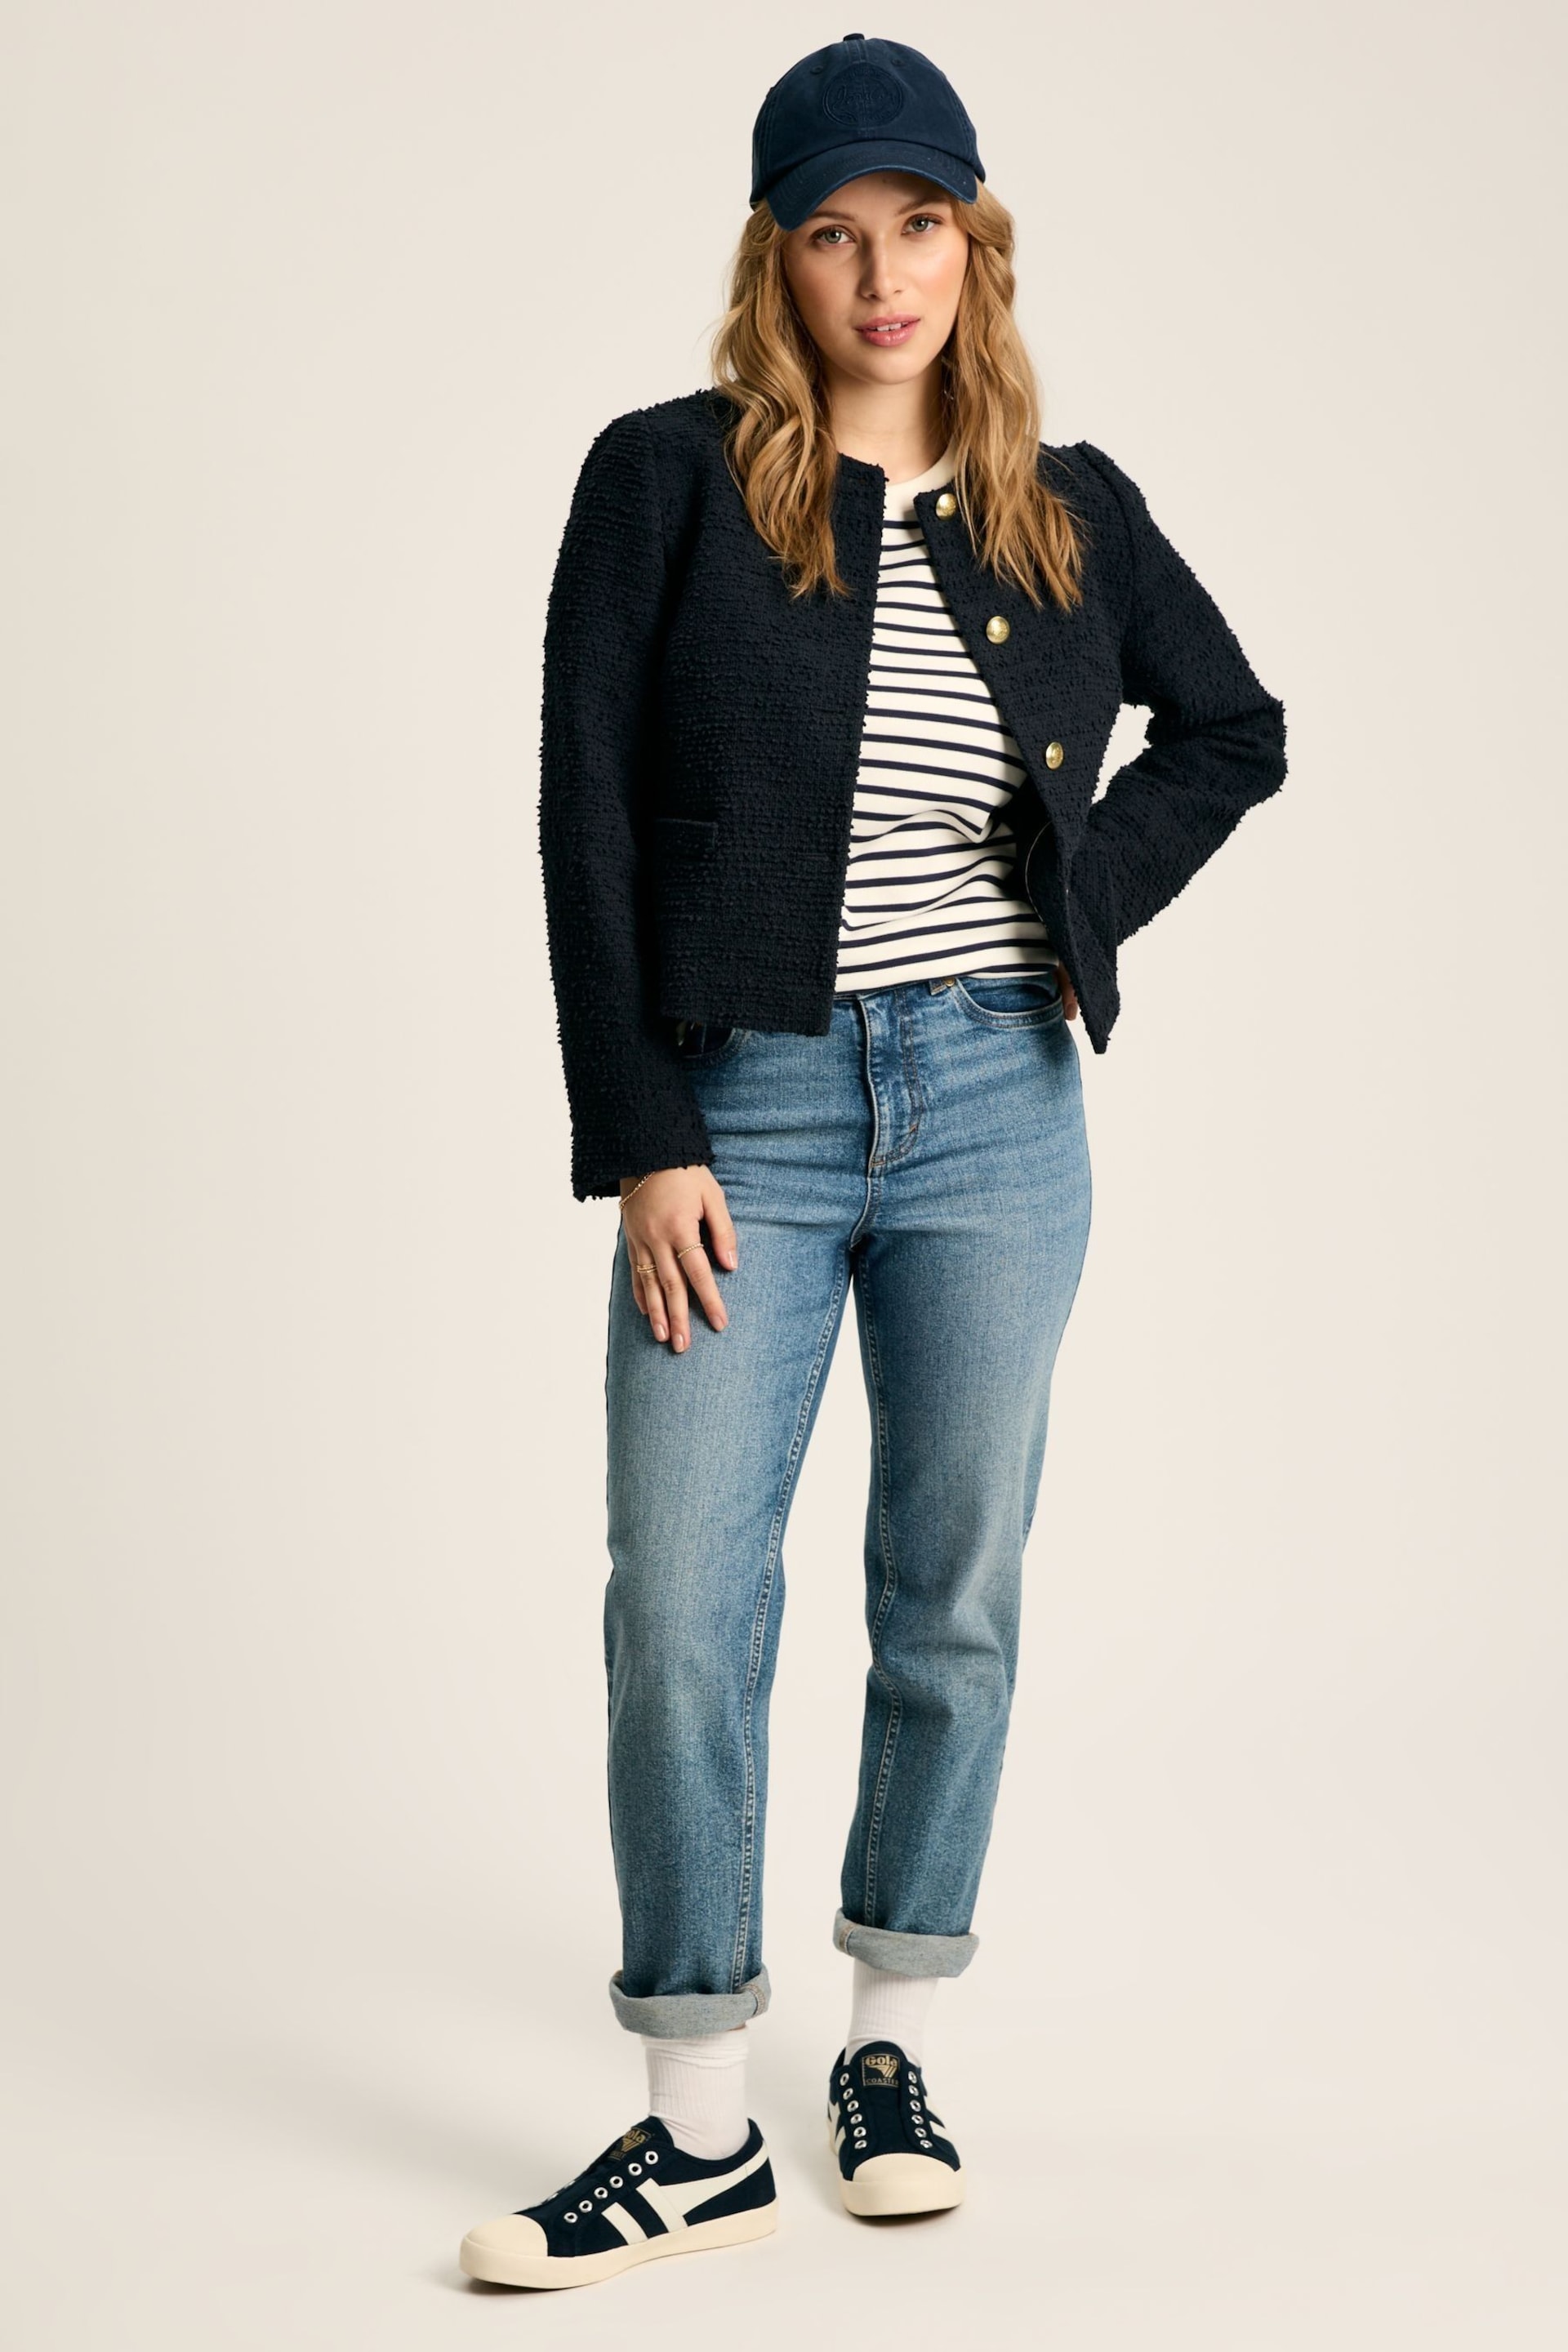 Joules Hampstead Navy Boucle Jacket - Image 5 of 8